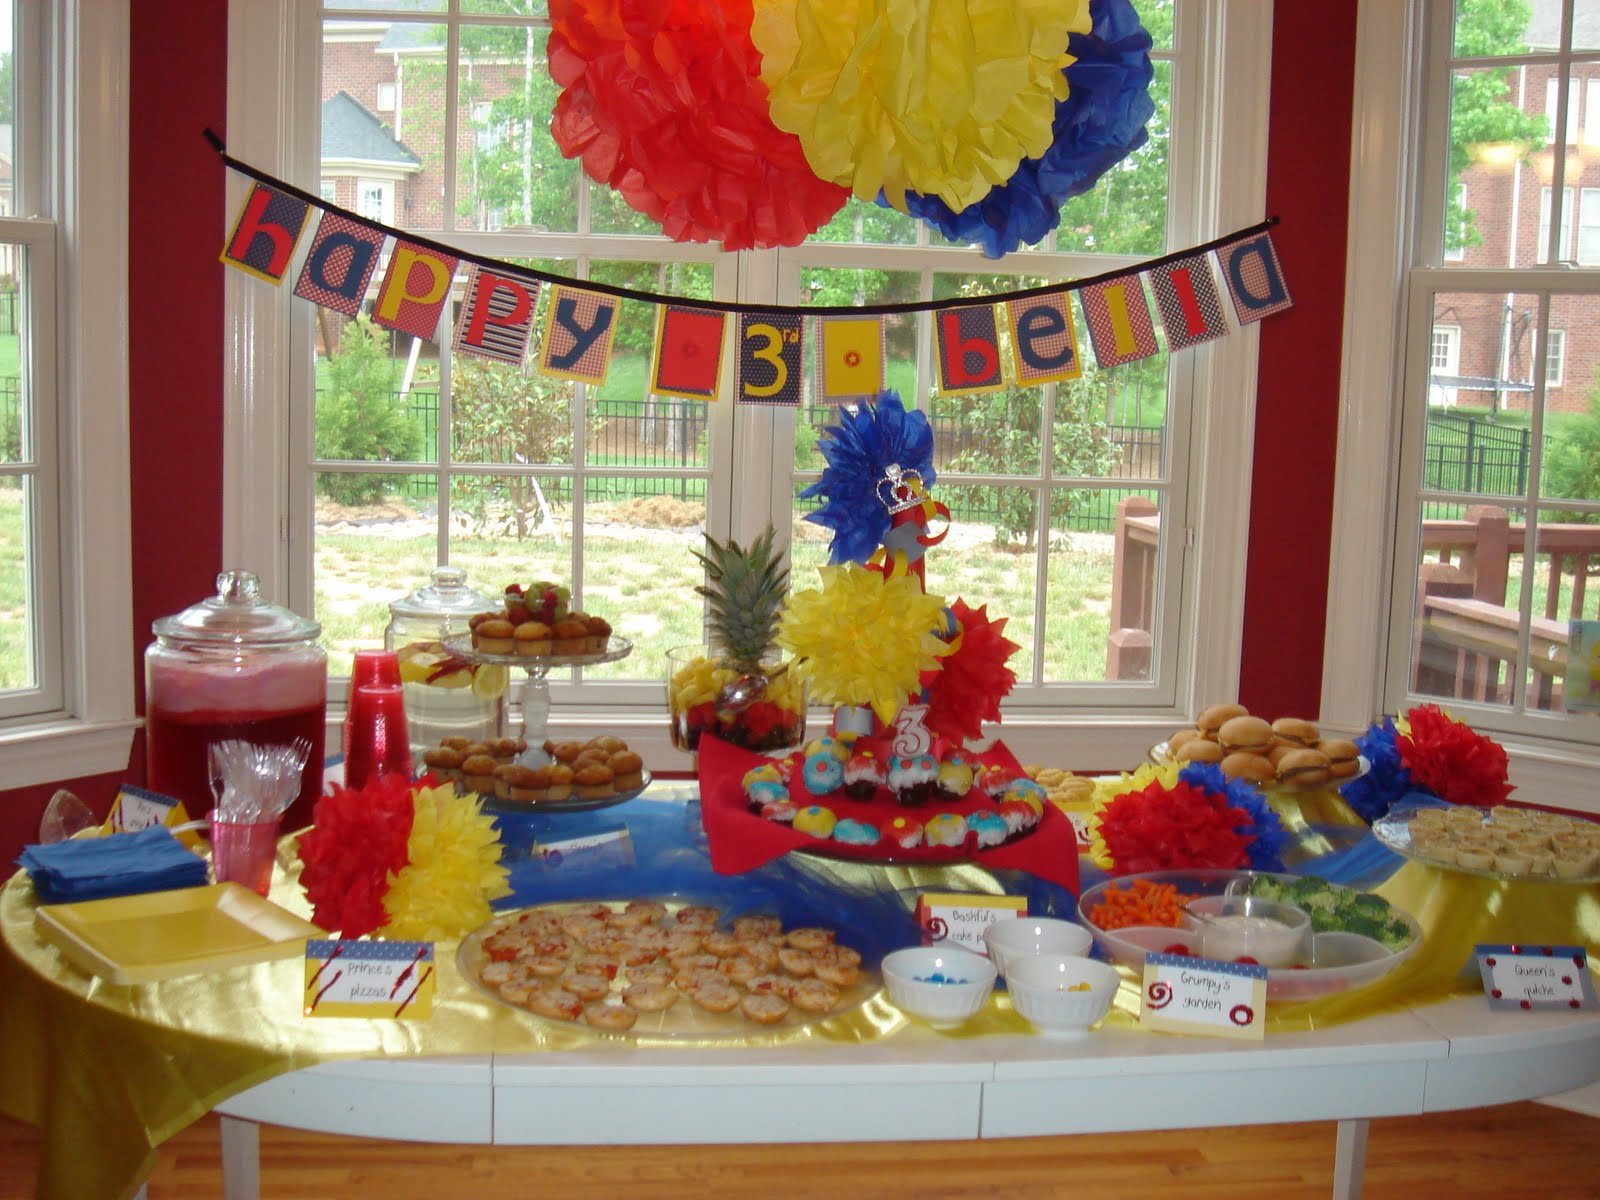 Snow White Party Food Ideas
 Everyday is a "Hollyday" Snow White Party